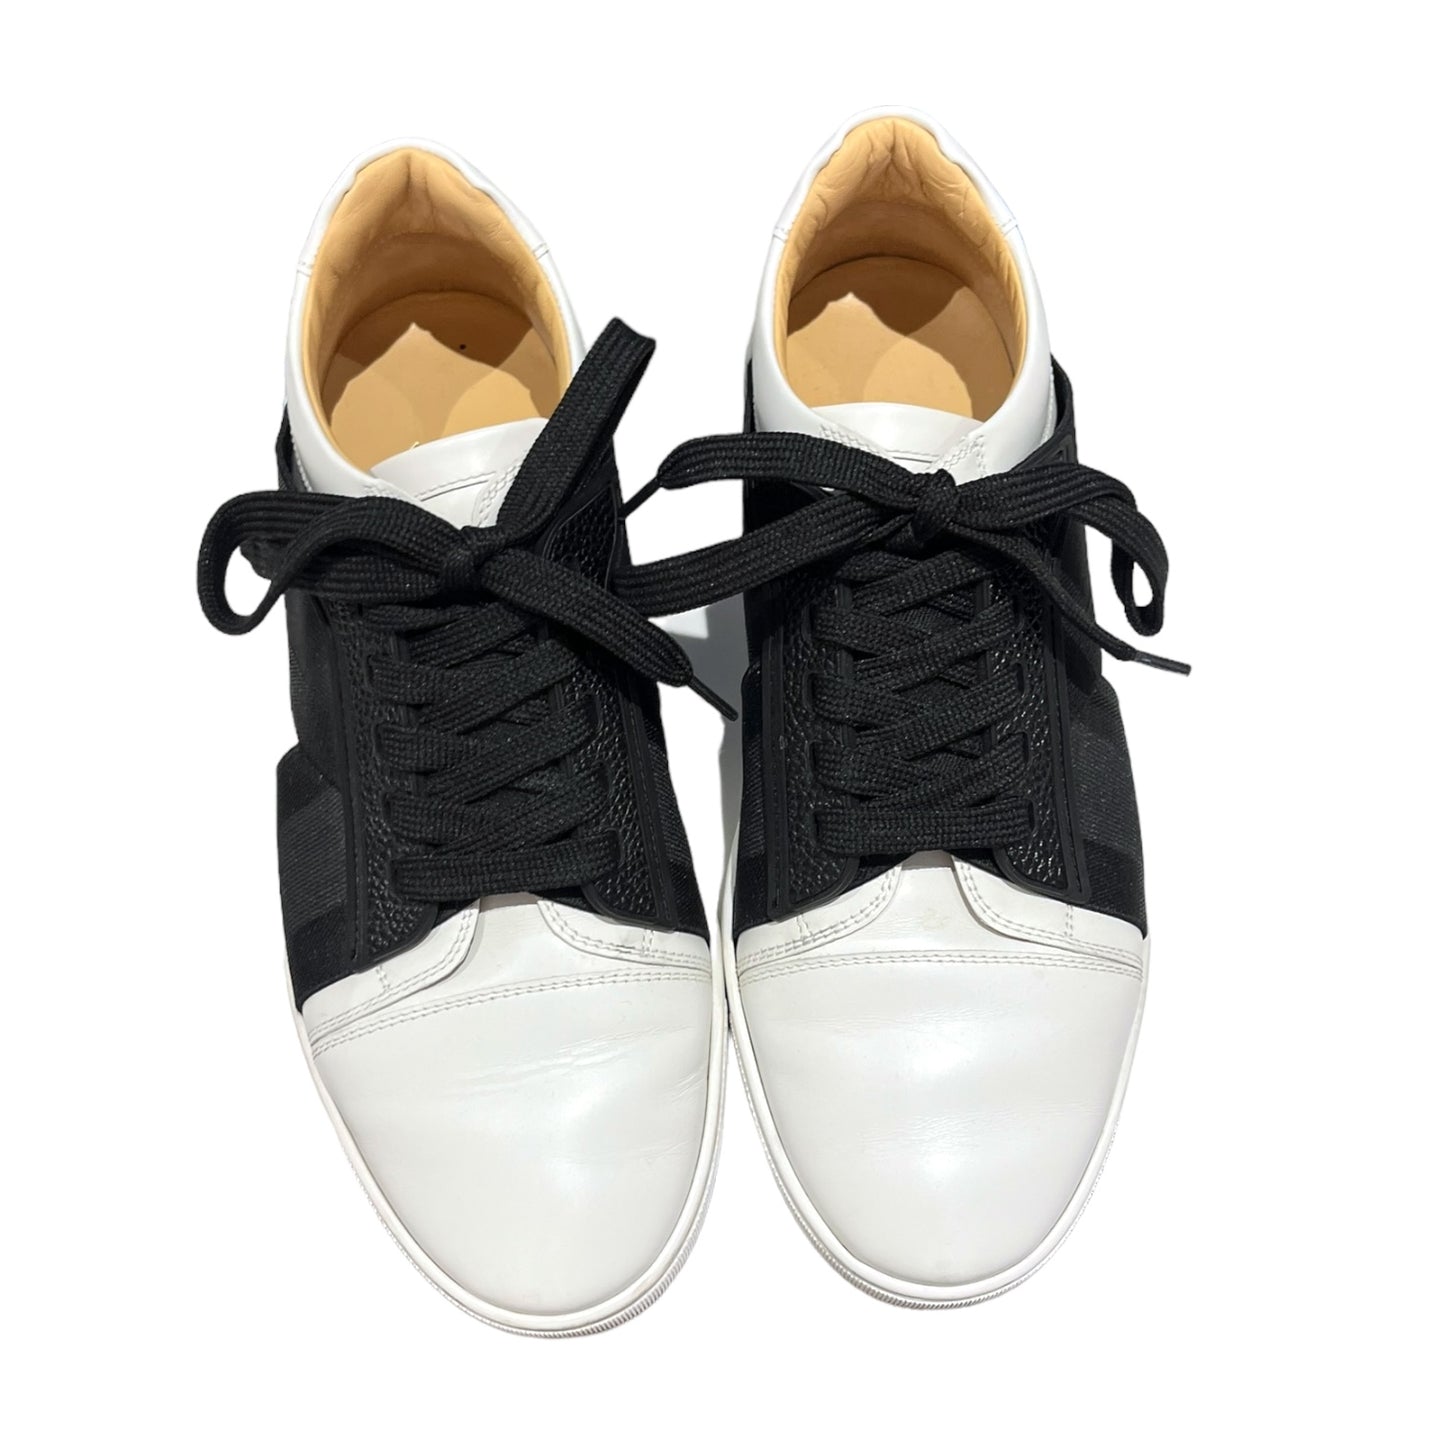 Christian Louboutin White and Black Trainers - 6